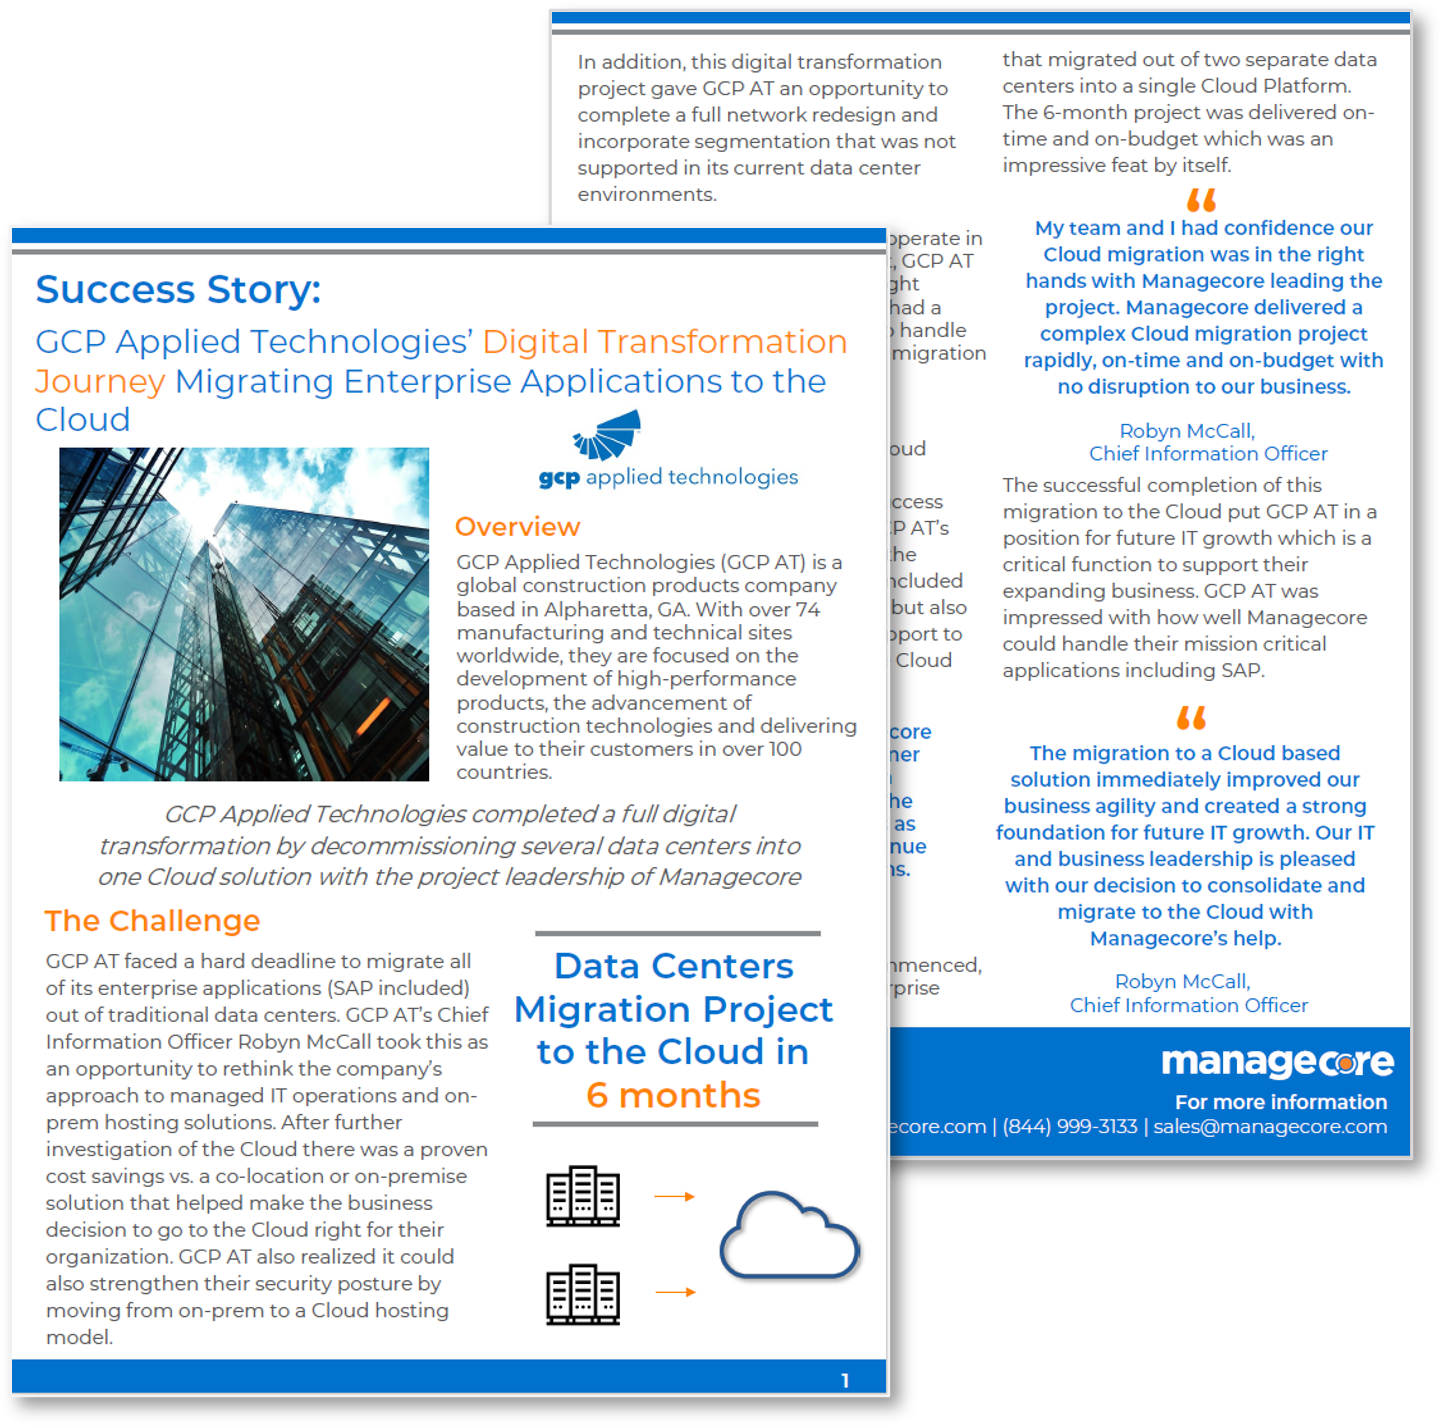 Managecore Customer GCP Applied Technologies Customer Case Study: Their digital transformation journey migrating and managing enterprise applications to the Cloud